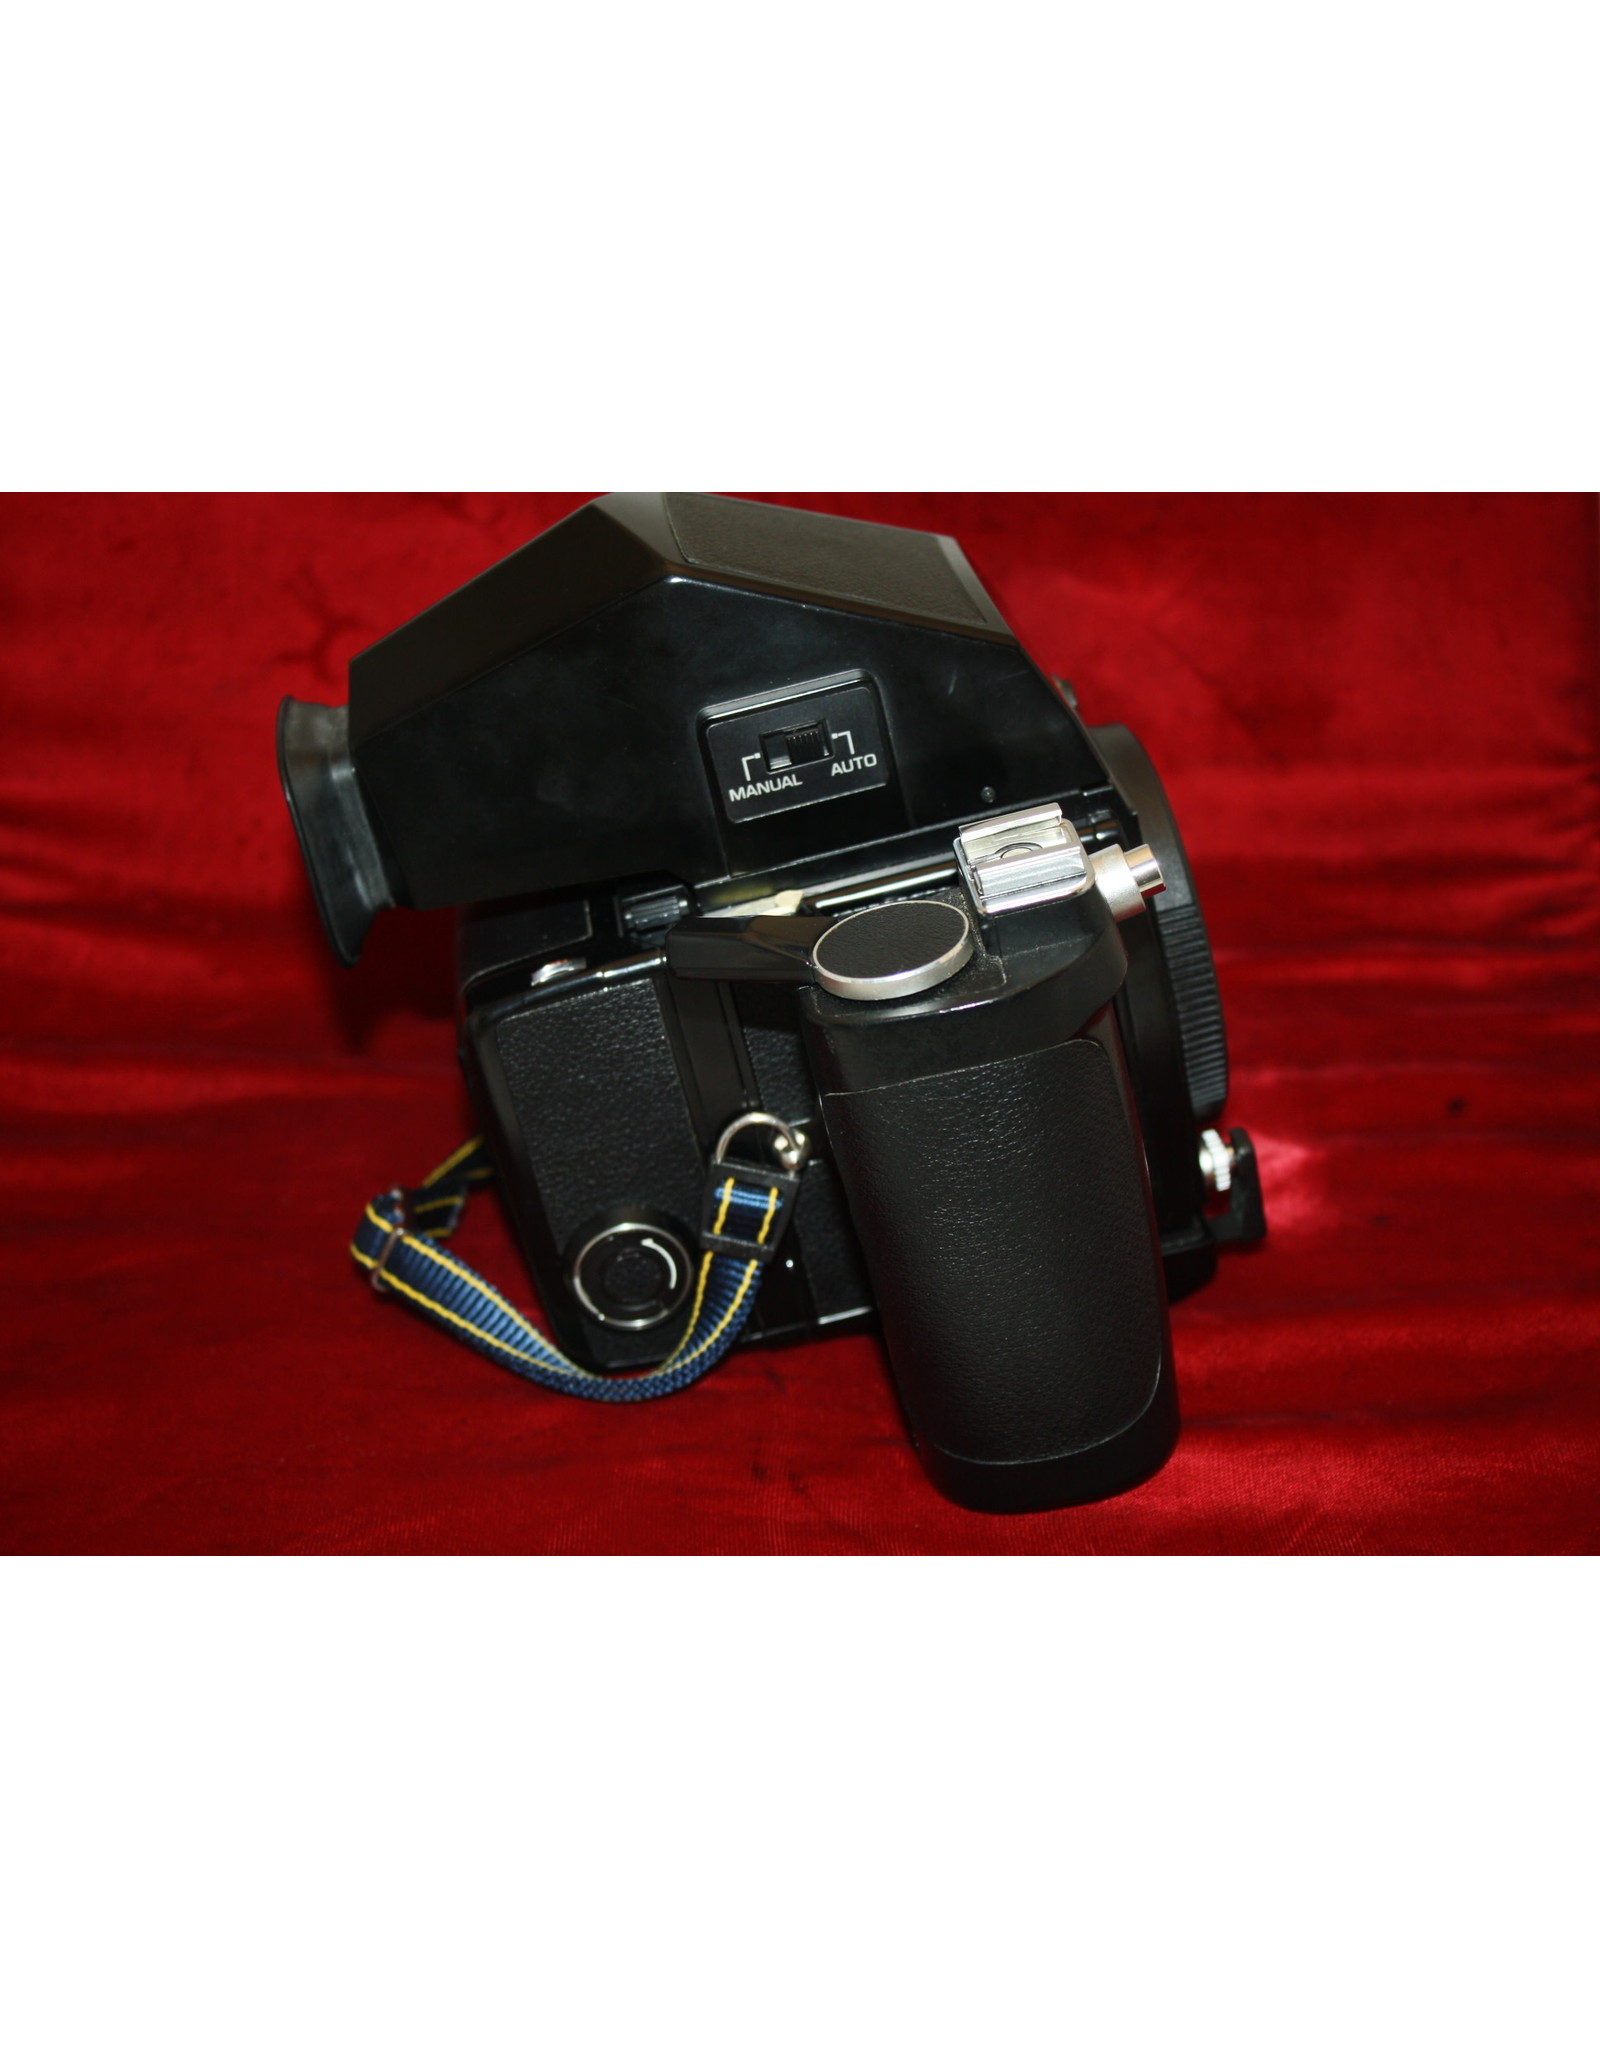 Bronica Bronica SQ-A body with auto prism finder, 120 back, speed grip and strap (MINT)